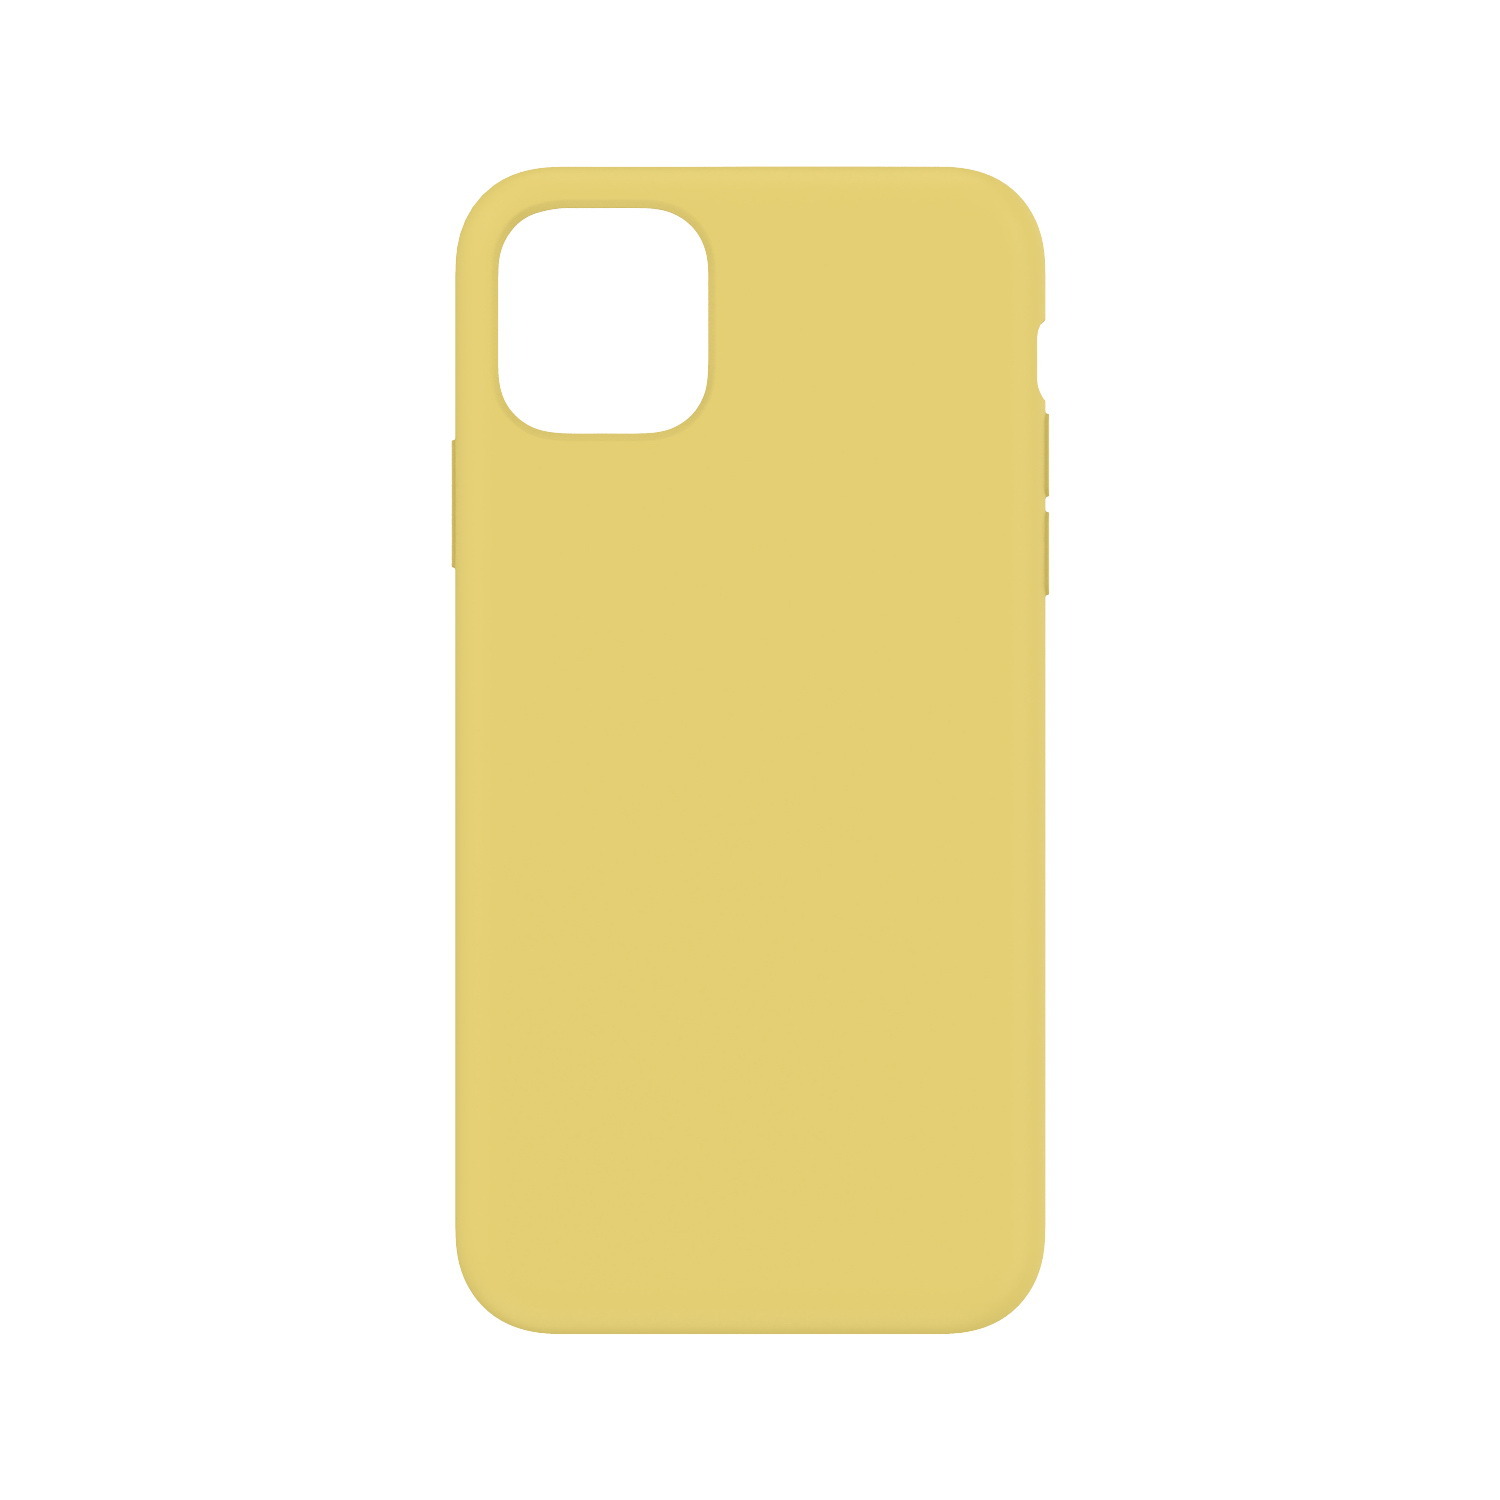 HEAL Case for iPhone 11 Pro (Yellow) Case Silicone